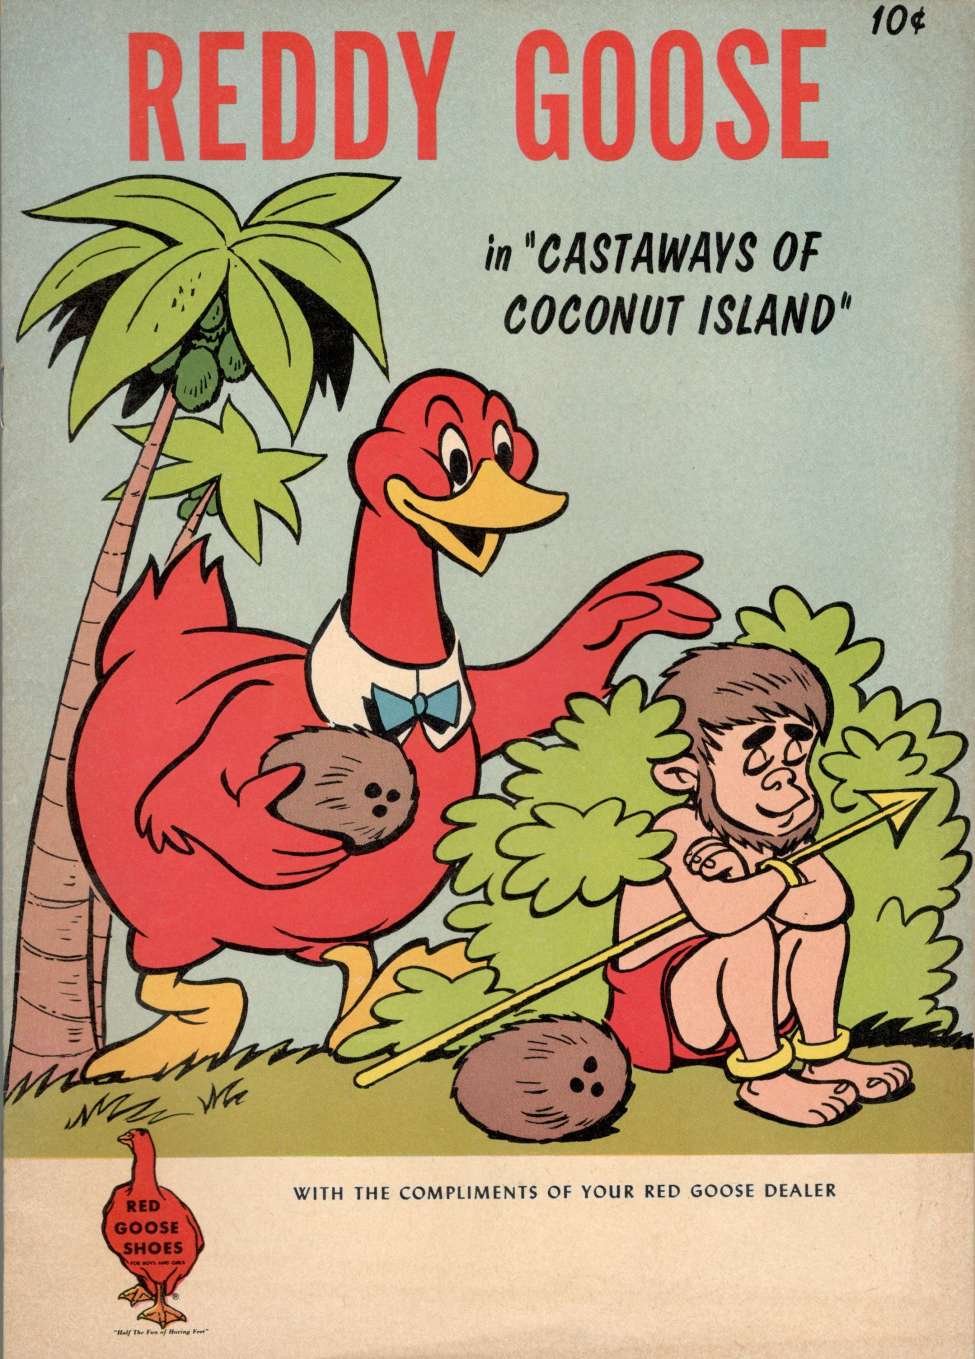 Book Cover For Reddy Goose 5 - The Castaways of Coconut Island